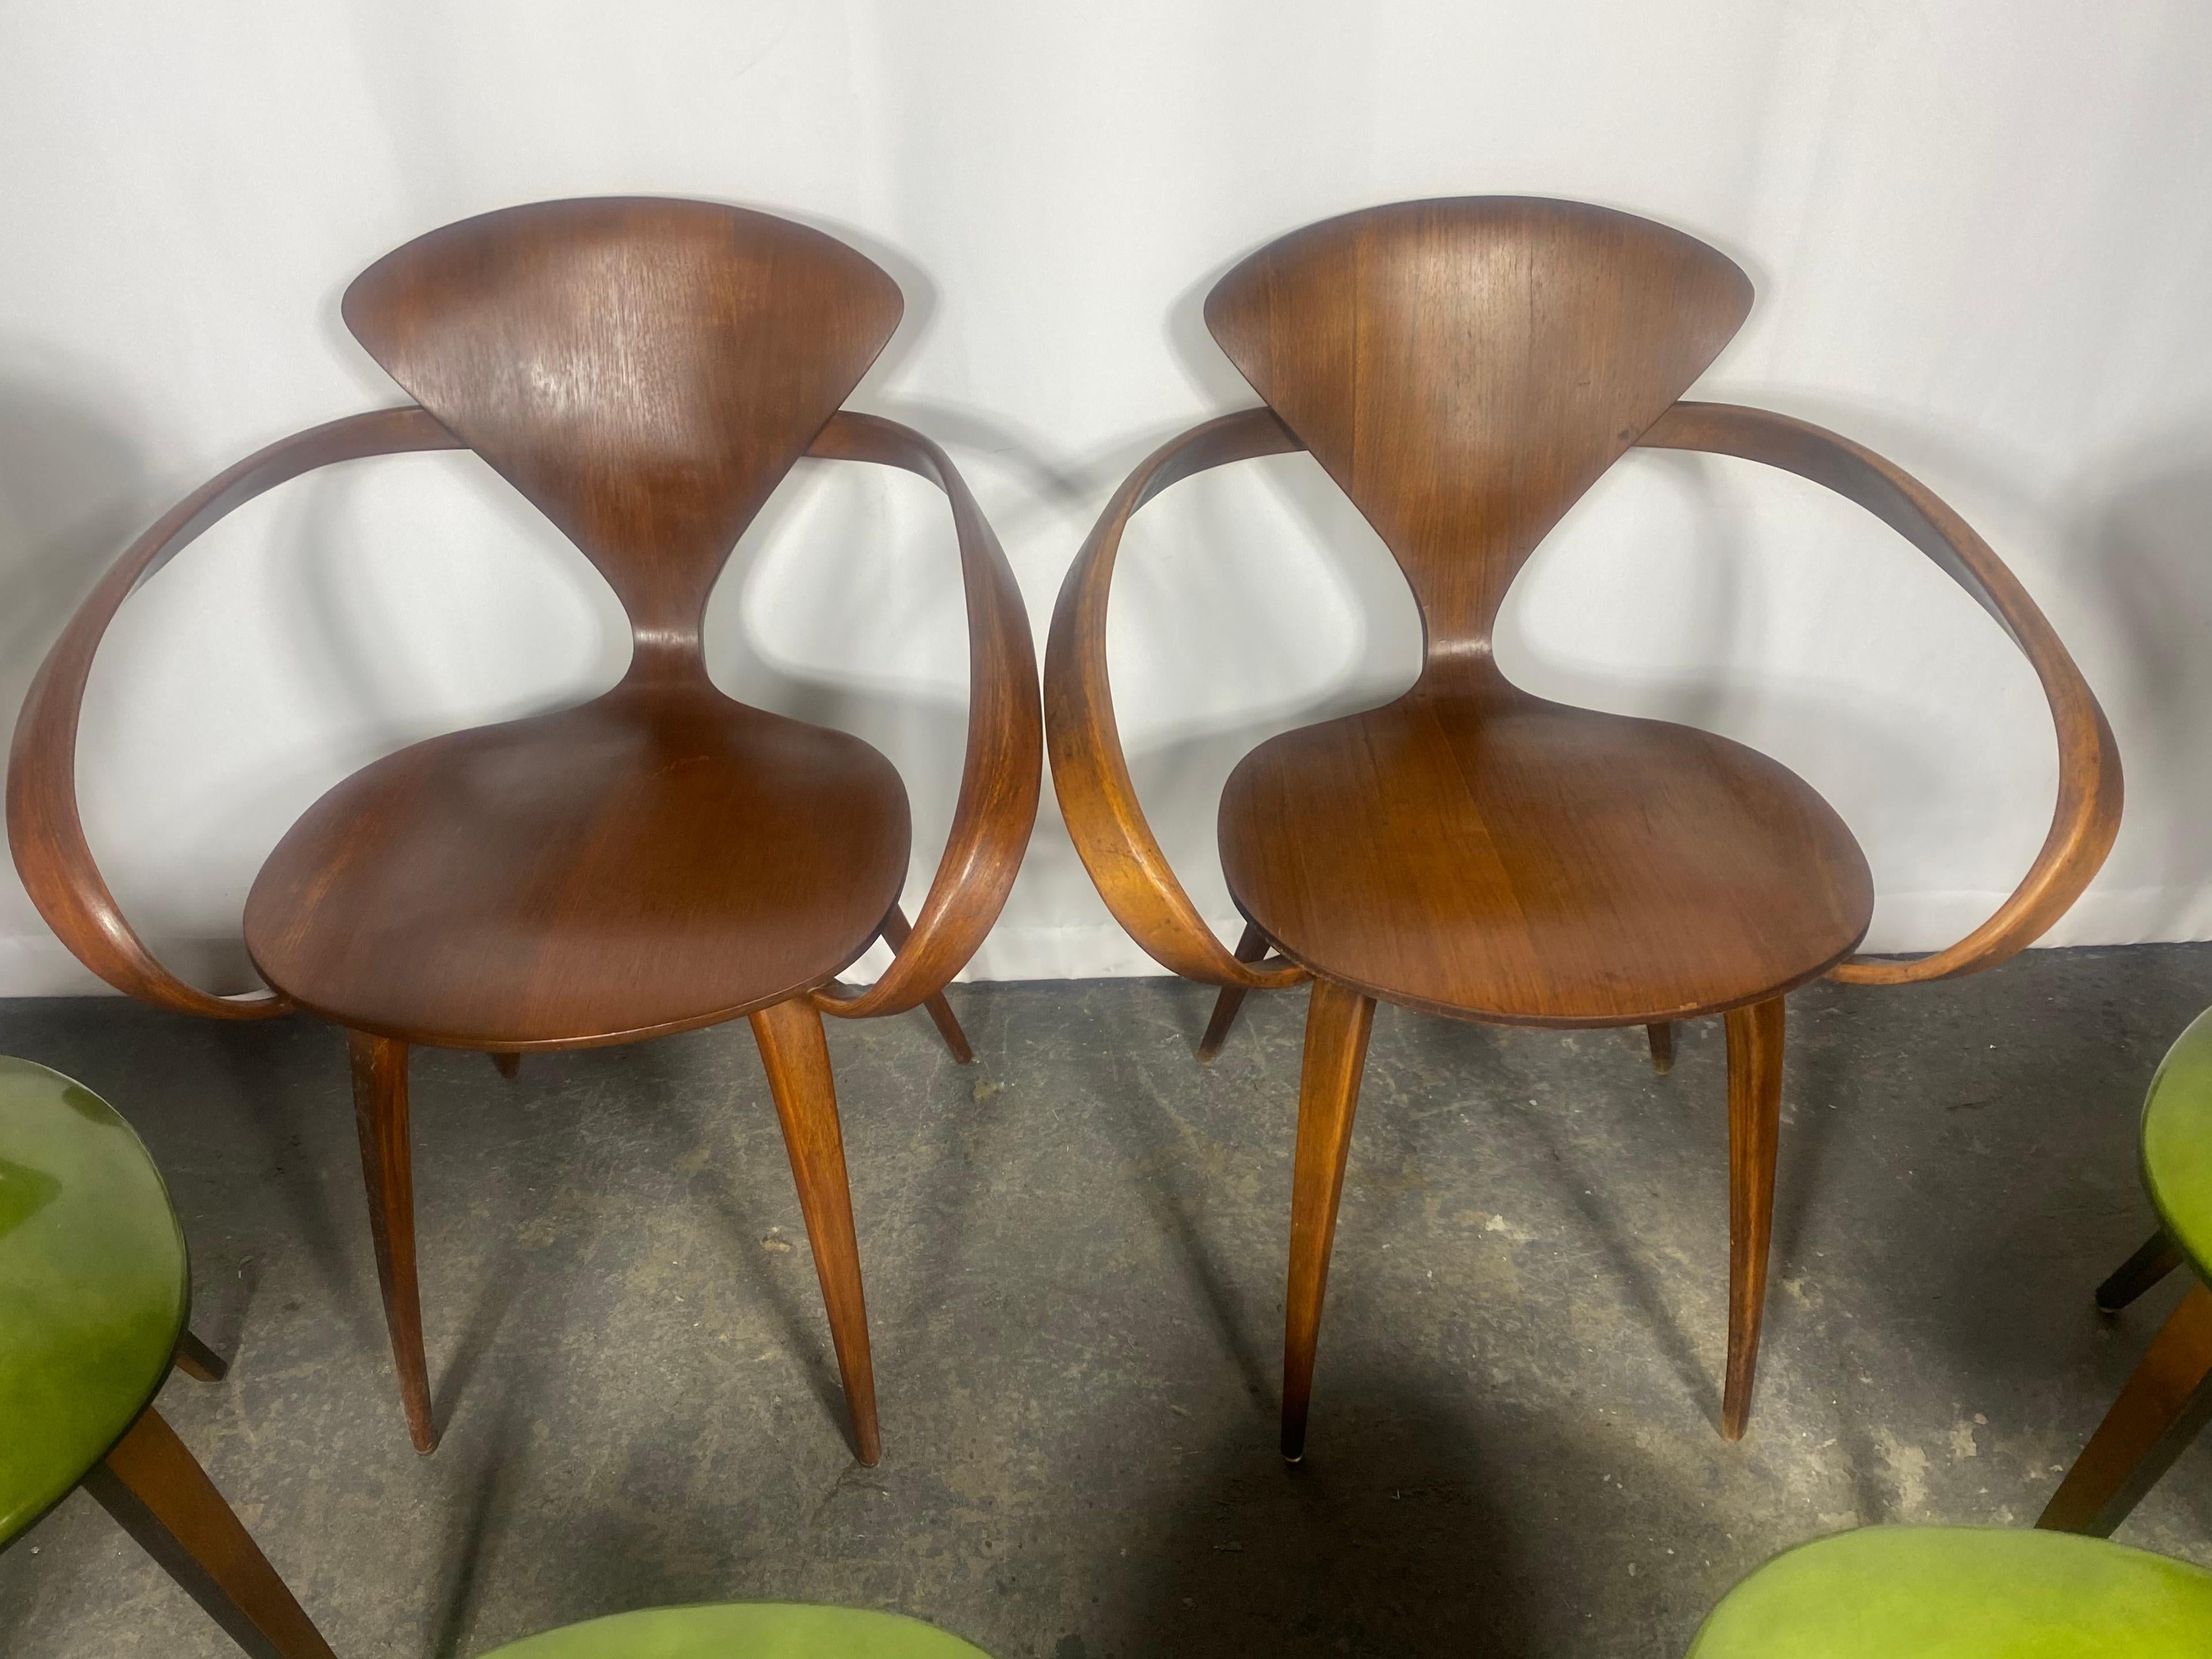 Patent Leather Set of 6 Norman Cherner Dining Chairs, Made by Plycraft, USA, 1963. 2 Arm Chairs For Sale